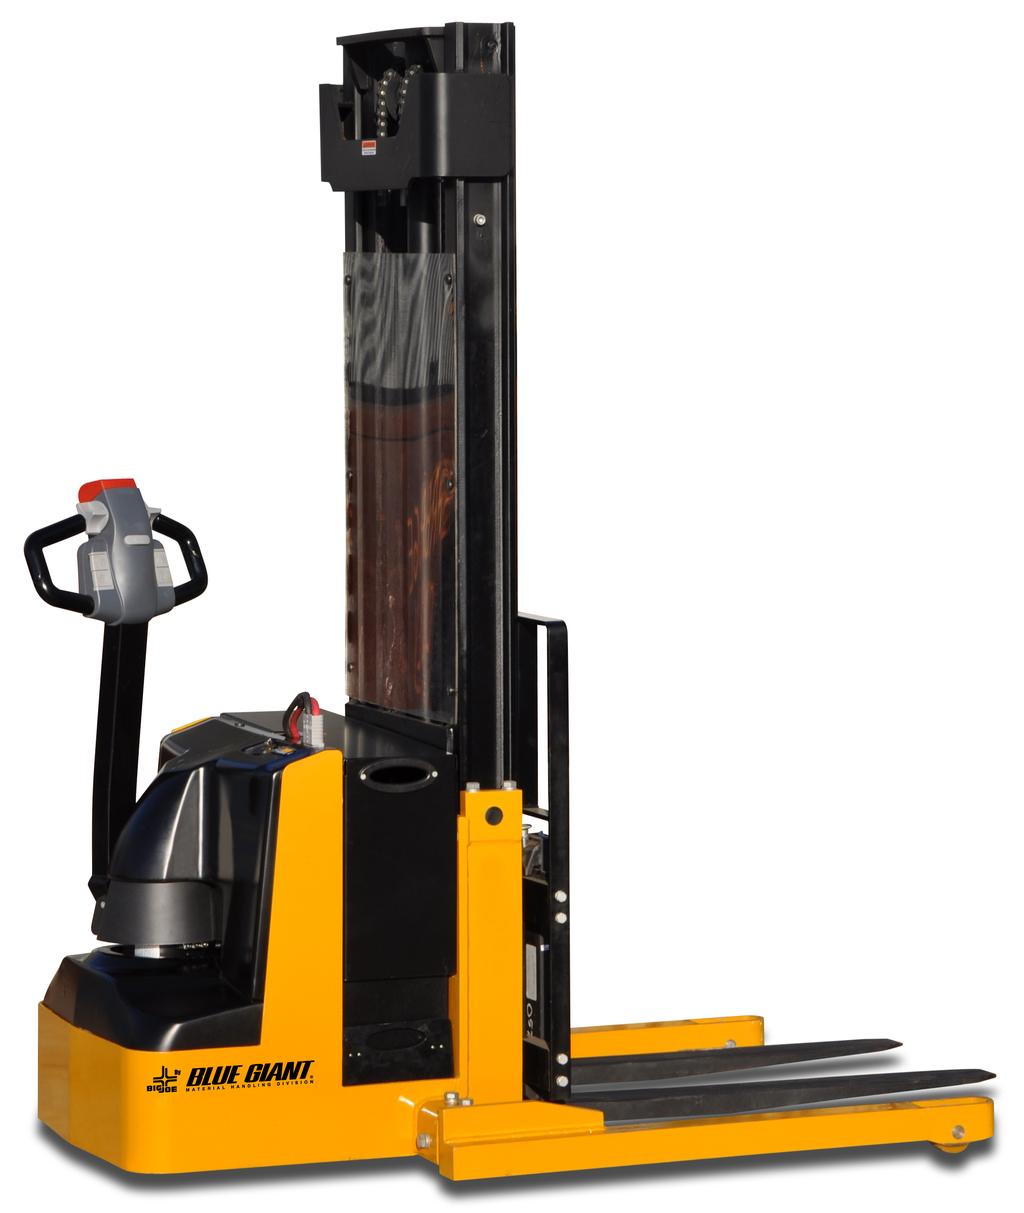 SELF-PROPELLED, STRADDLE LIFT TRUCK PDS SERIES OWNER S MANUAL OPERATION MAINTENANCE S LIST DO NOT INSTALL, OPERATE OR SERVICE THIS PRODUCT UNLESS YOU HAVE READ AND FULLY UNDERSTAND THE ENTIRE